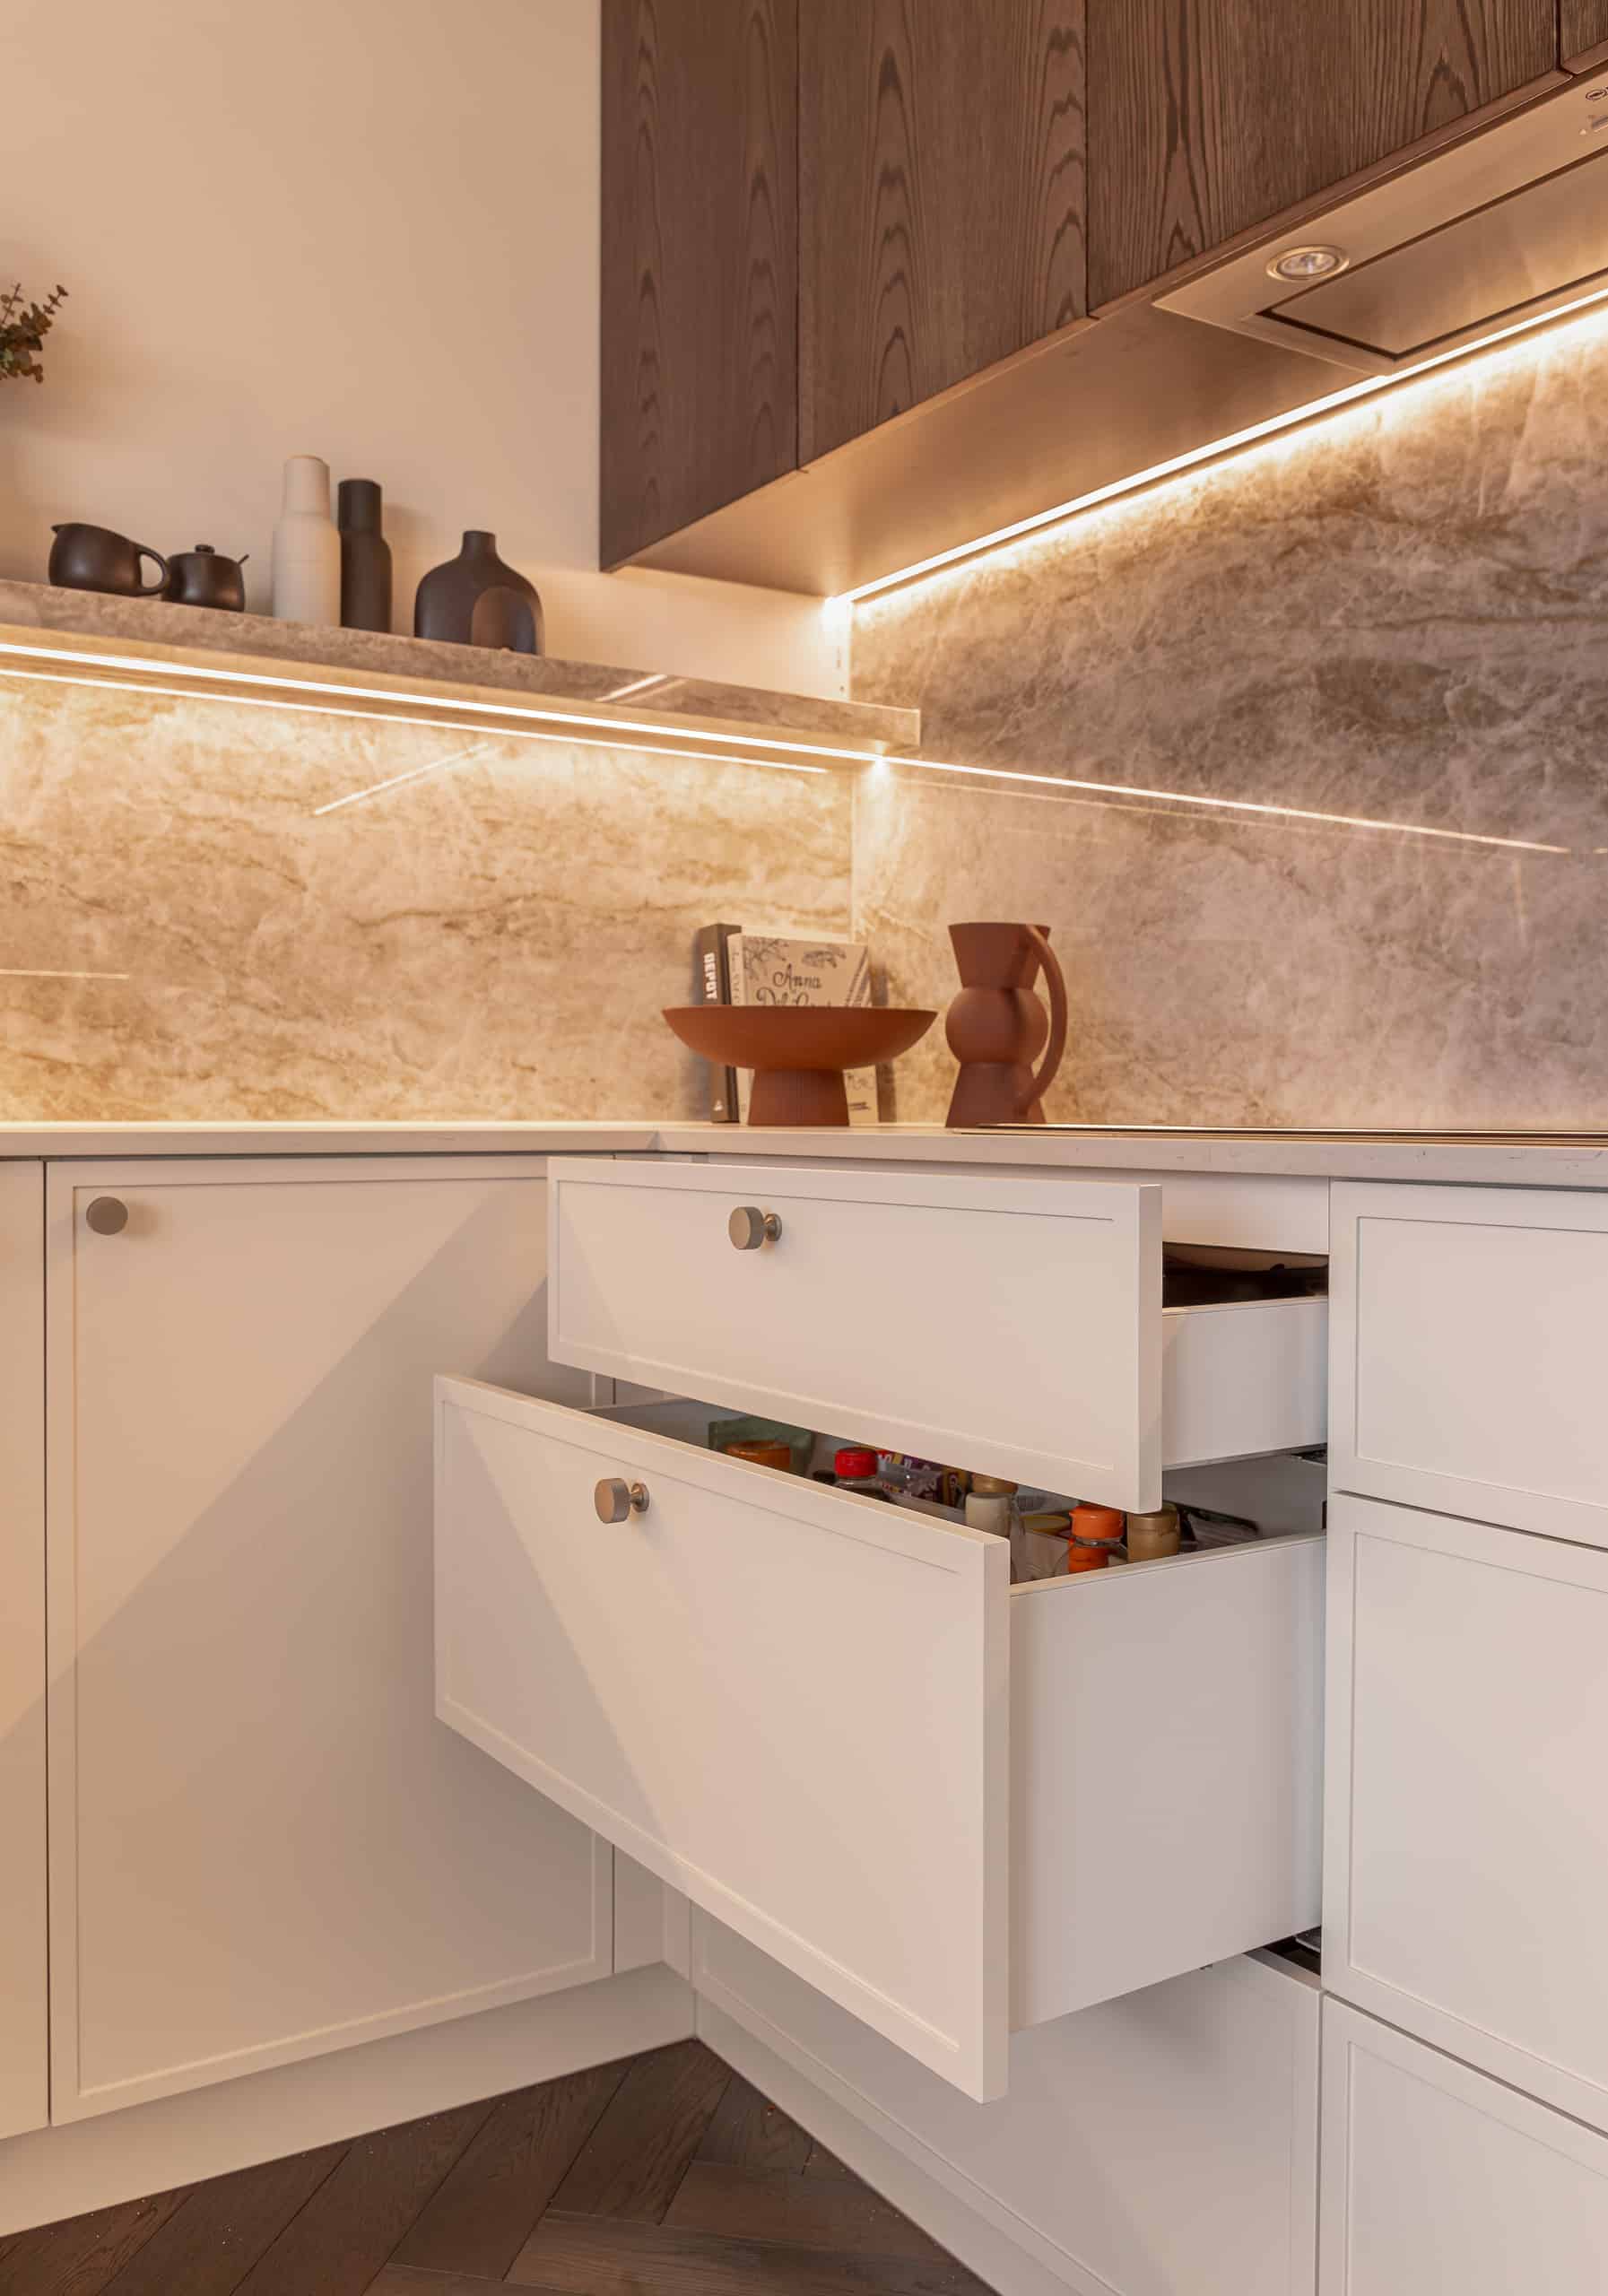 A cream kitchen with marble splashback, traditional cabinets open and brown upper cabinetry